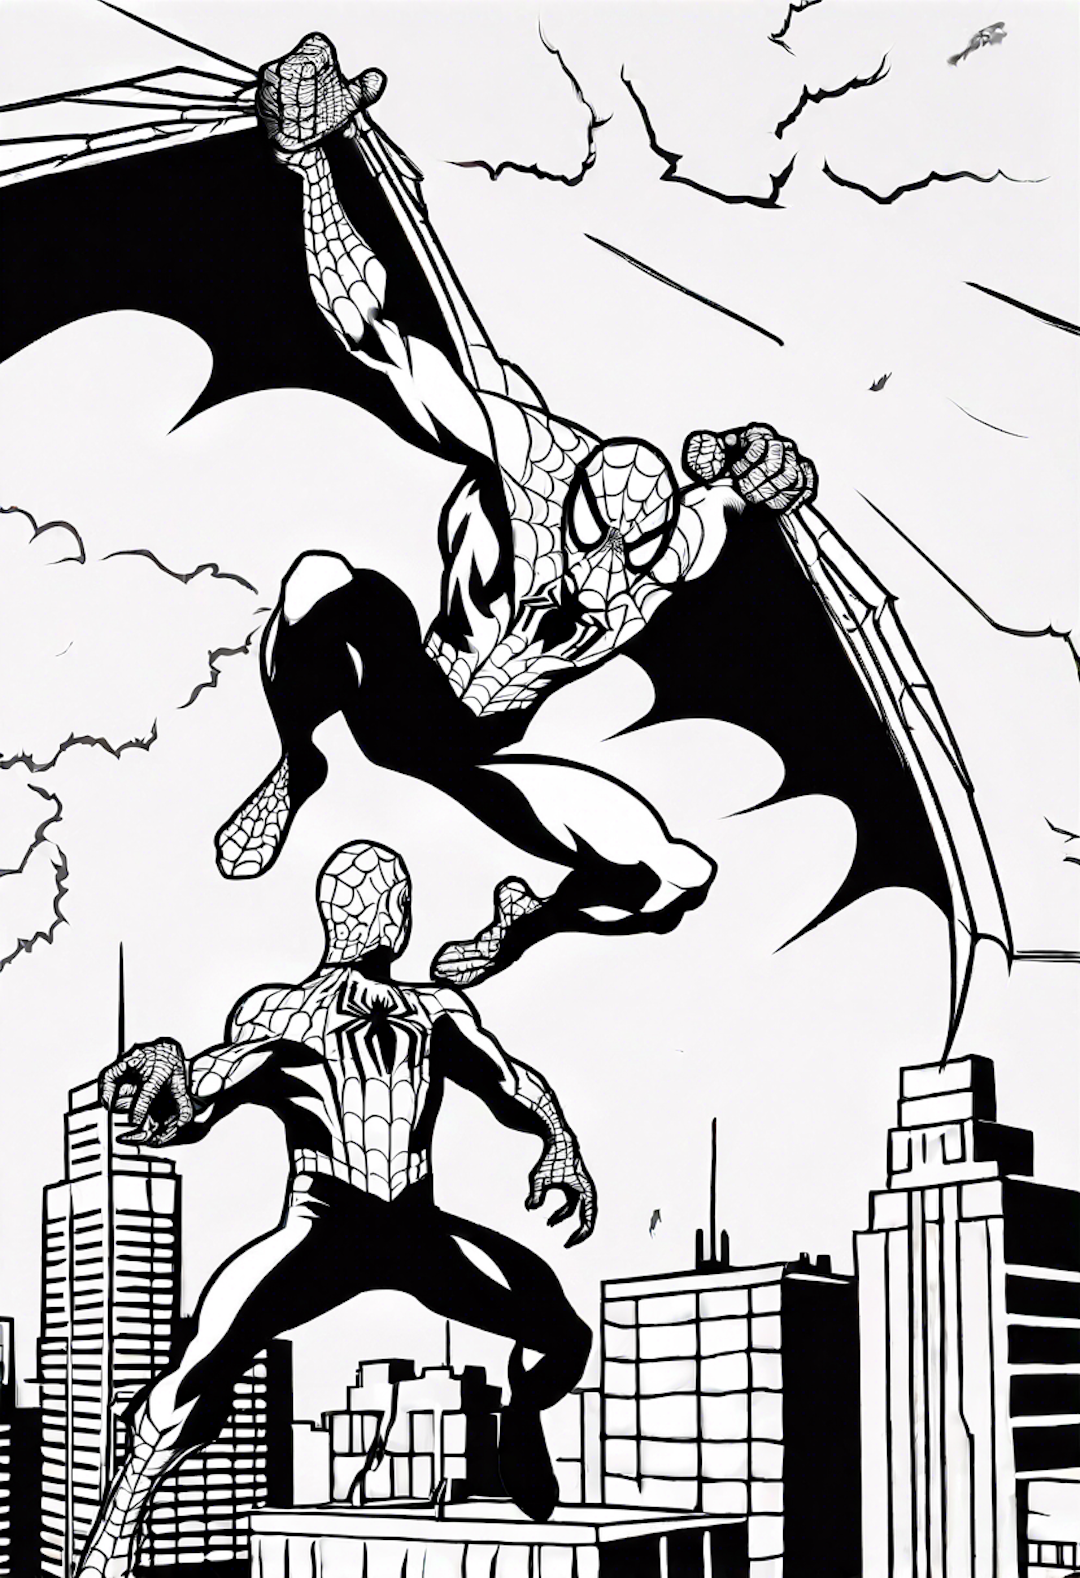 Spiderman In A Standoff With Vulture In The Sky